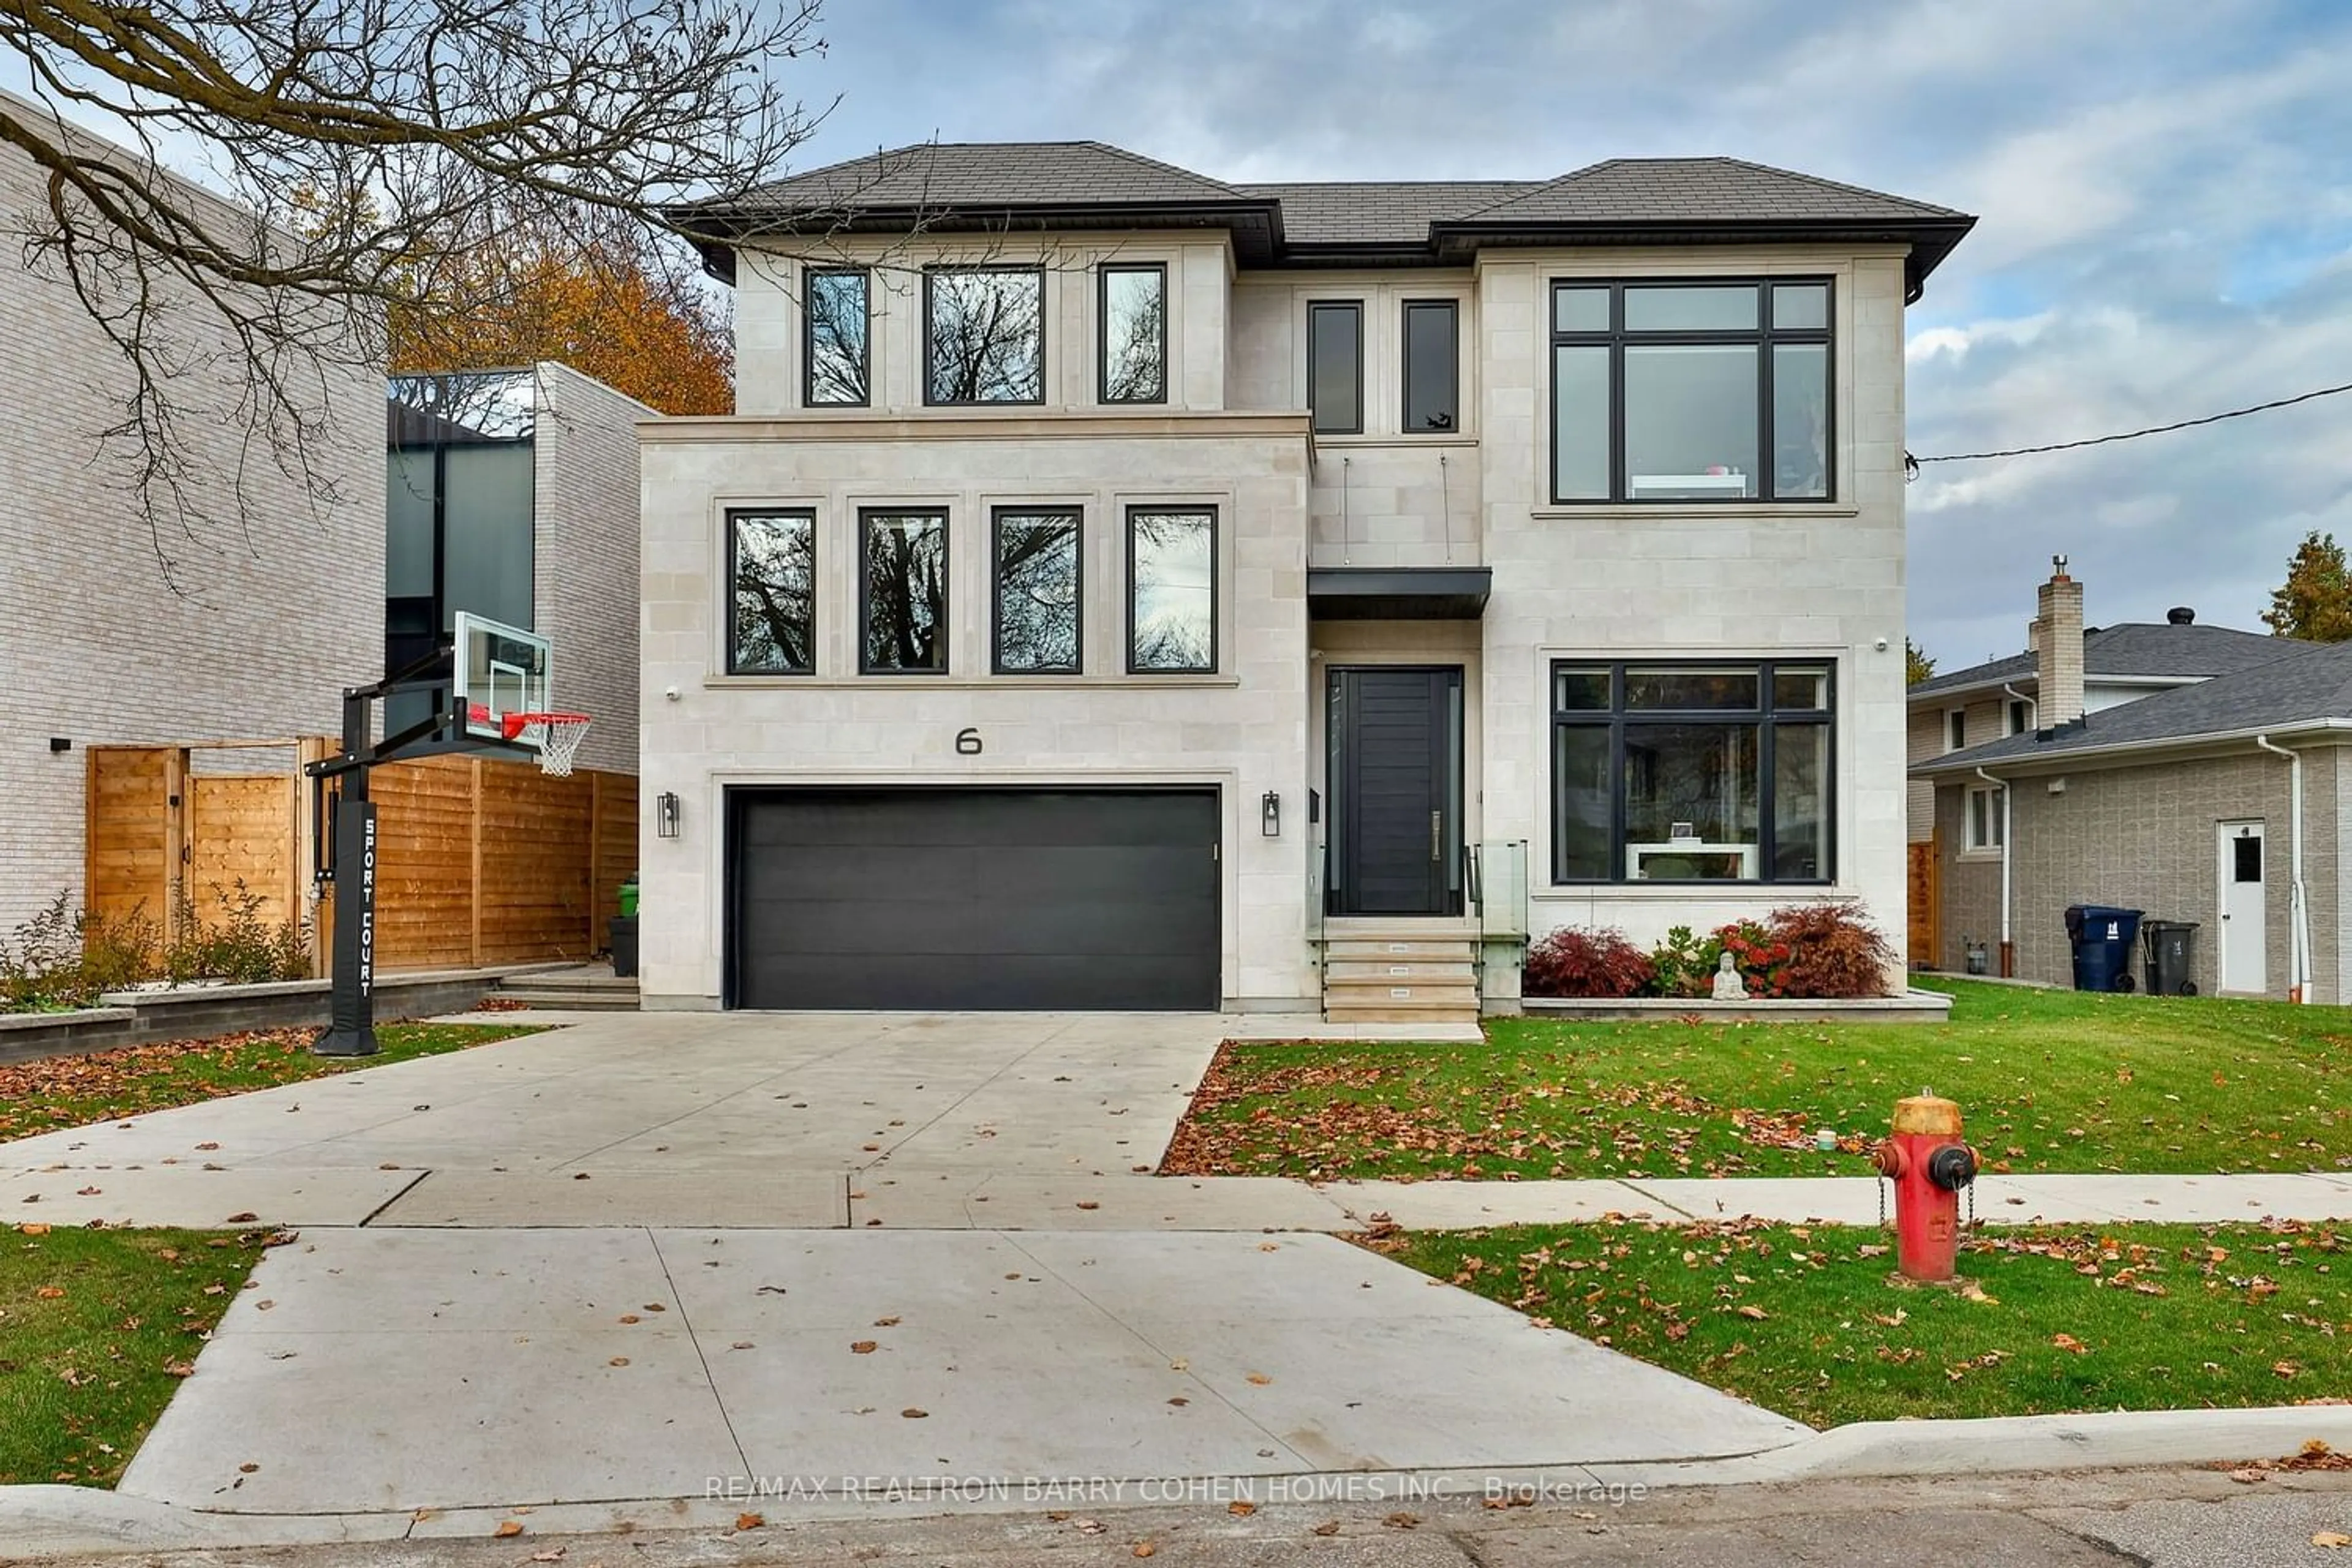 Home with brick exterior material for 6 Stubbs Dr, Toronto Ontario M2L 2R1